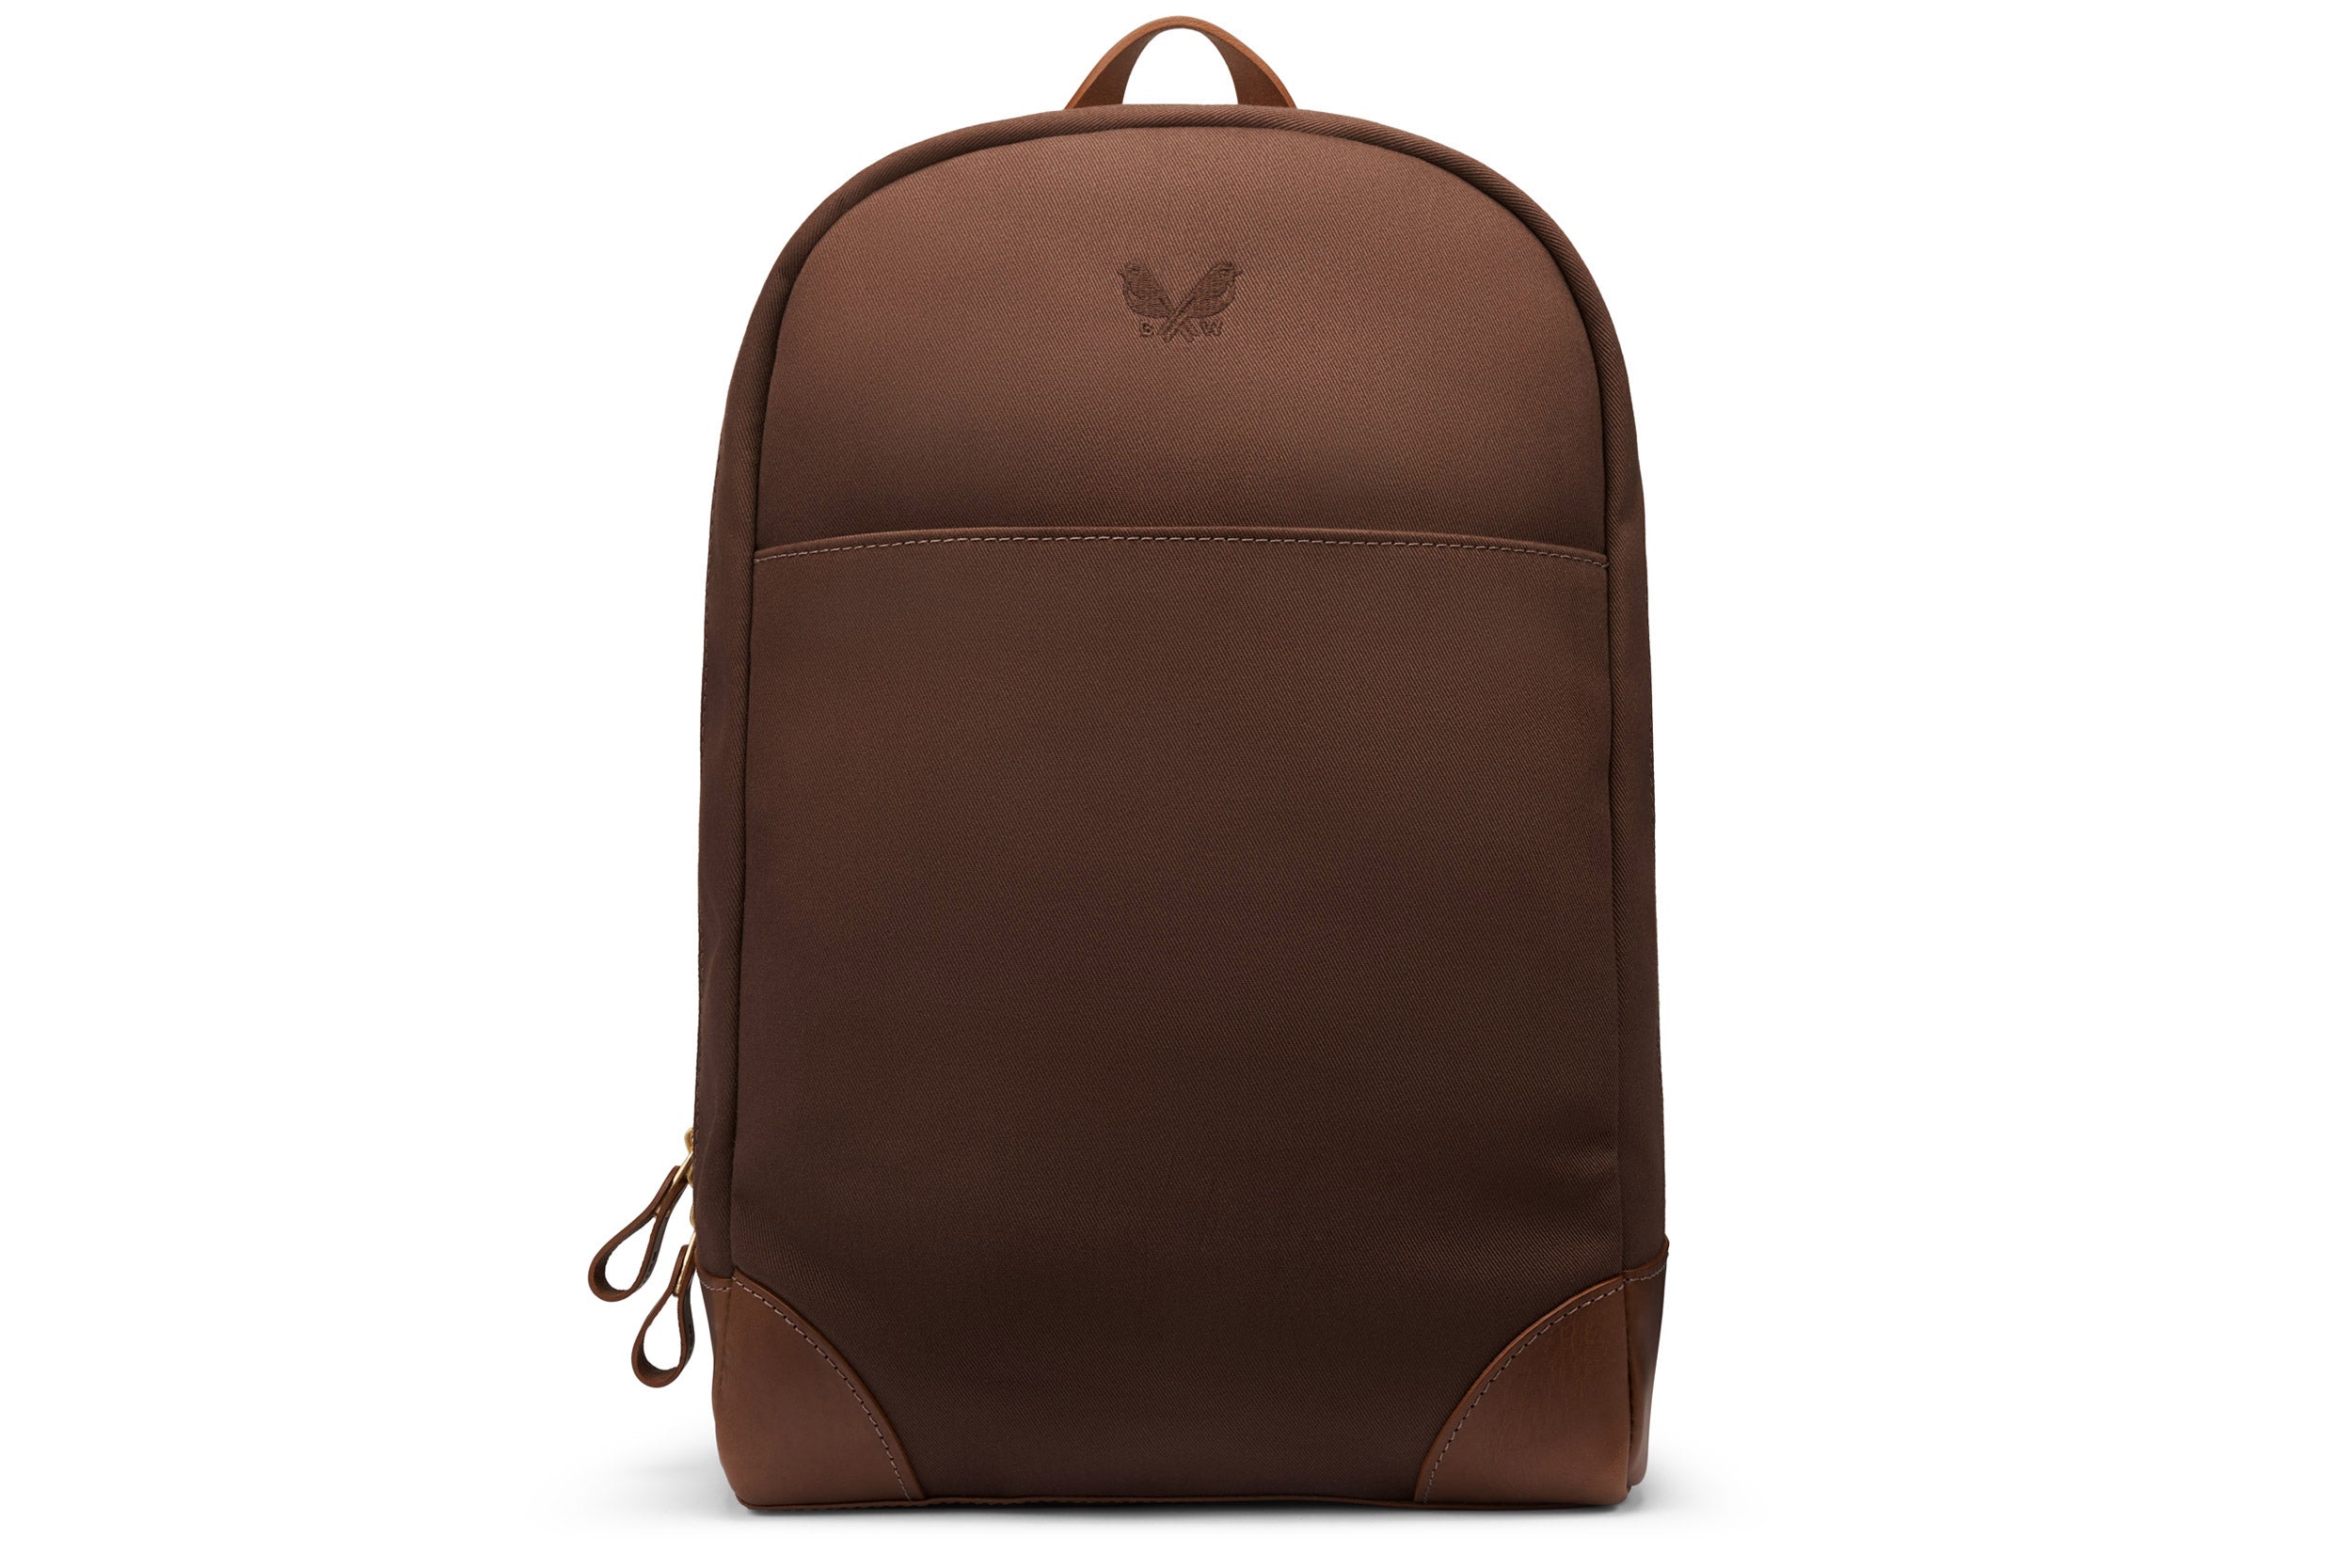 The Backpack | Brown Canvas Backpack for Men | Bennett Winch